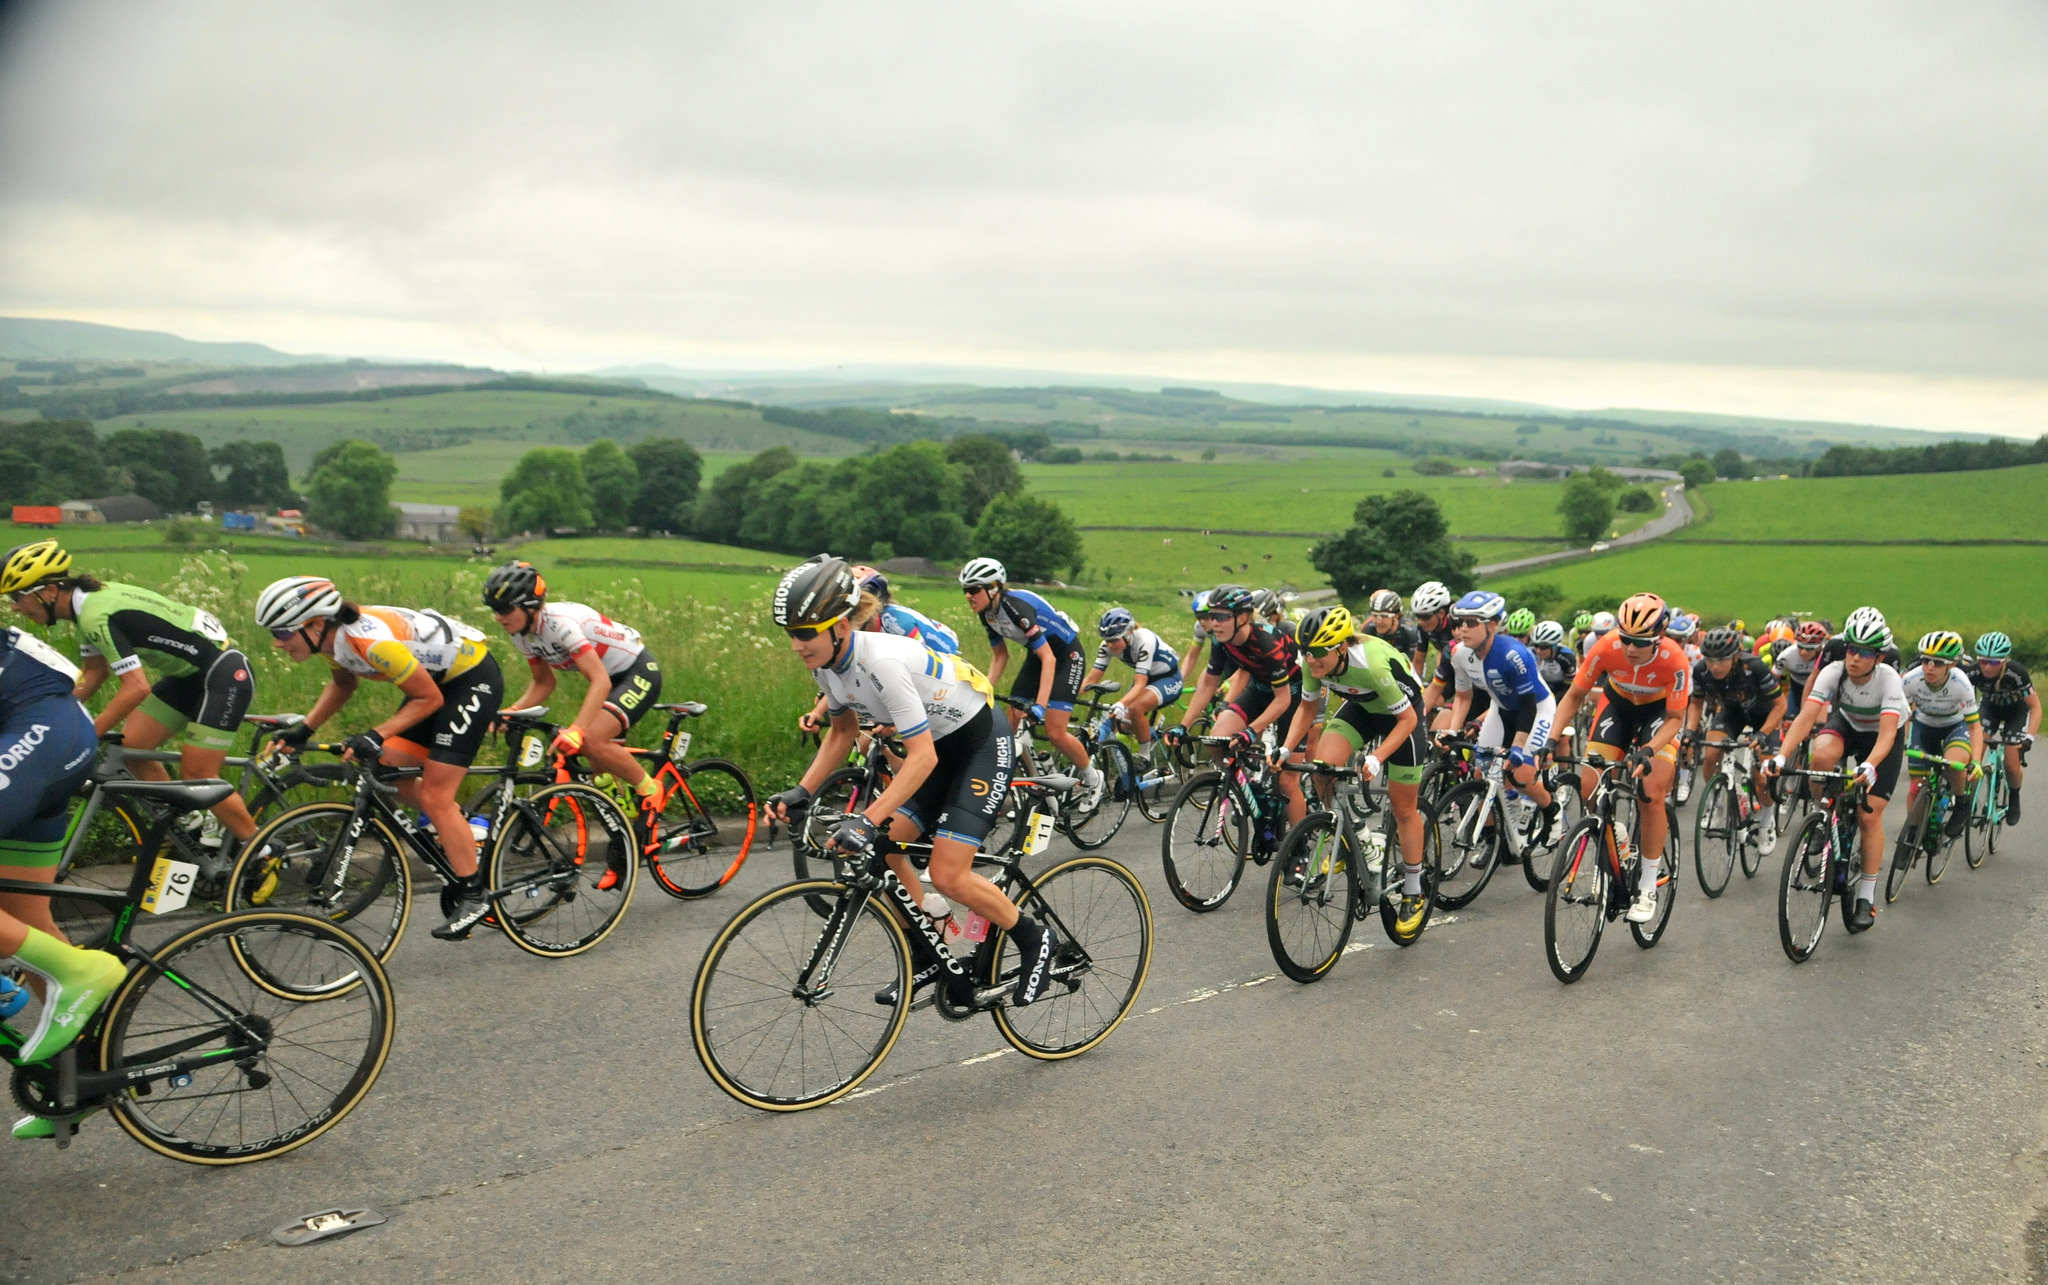 Road cyclists in the tour of Britain